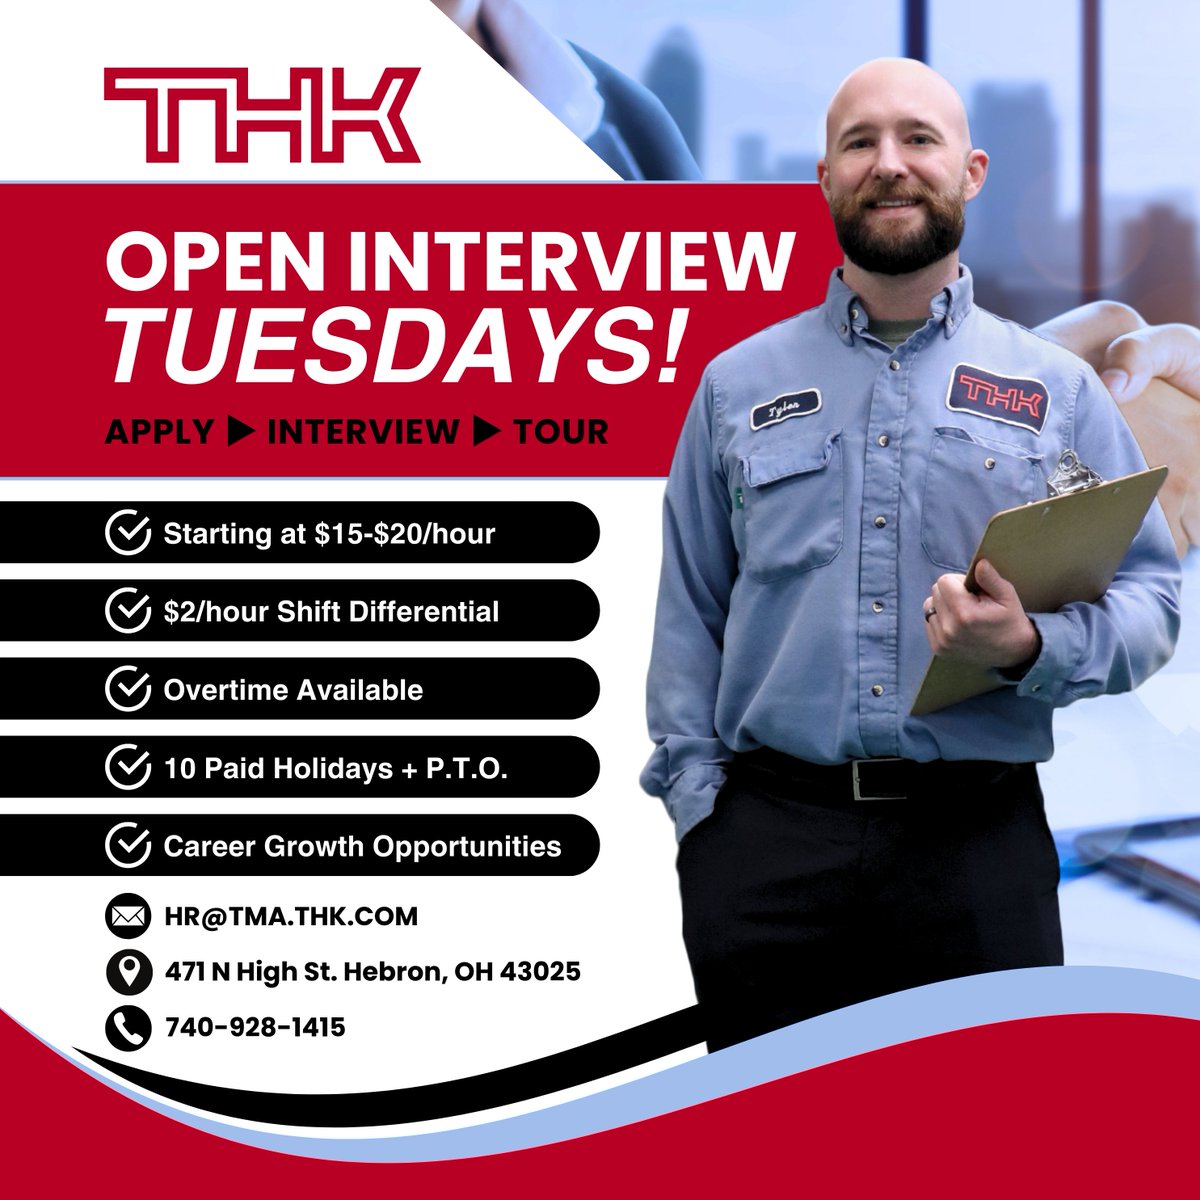 Every Tuesday from 8 a.m.-4 p.m., THK Manufacturing of America, Inc. opens its doors to potential new team members in Hebron. Come by for an application, a tour, and insights into what THK can offer you!

#careeropportunities #manufacturingjobs #THK #TMA #newcareer #OhioJobs